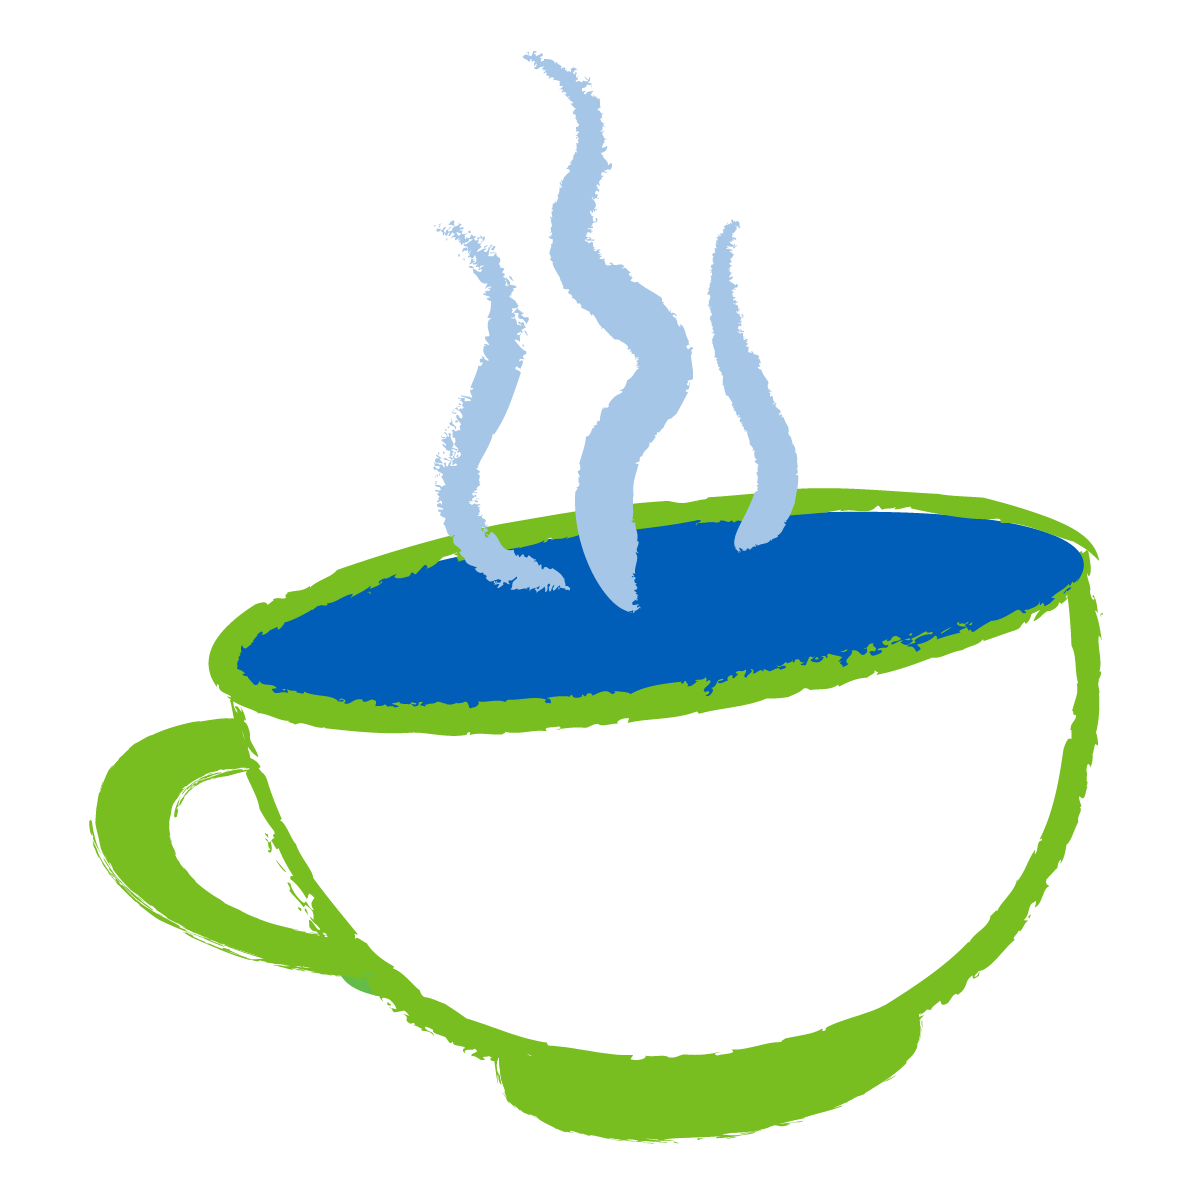 Illustration of a cup of tea